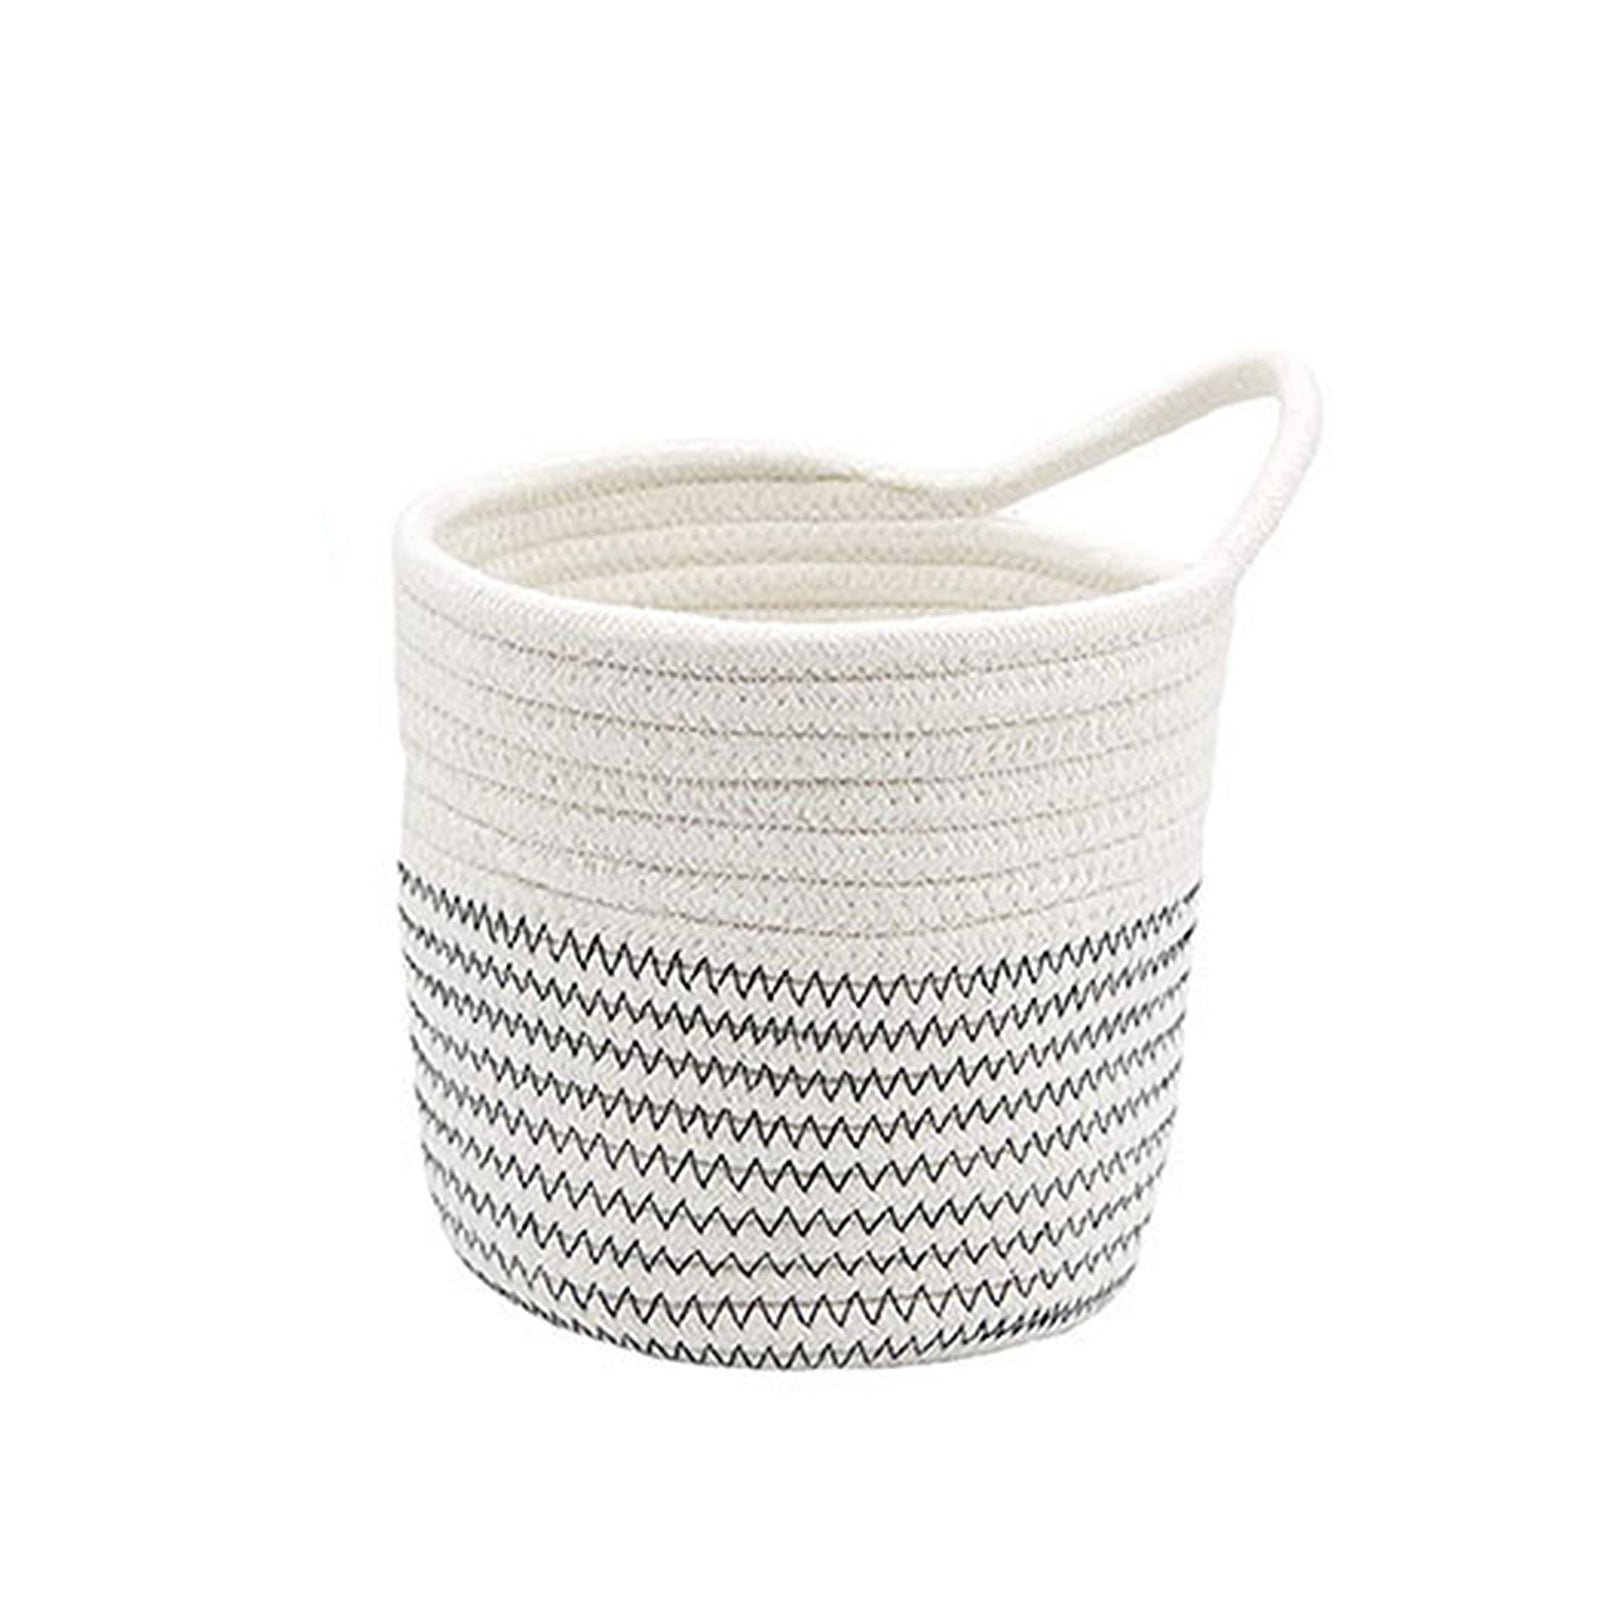 Cotton Woven Finishing Basket Small Hanging Rope Storage Box Eco Home Design 